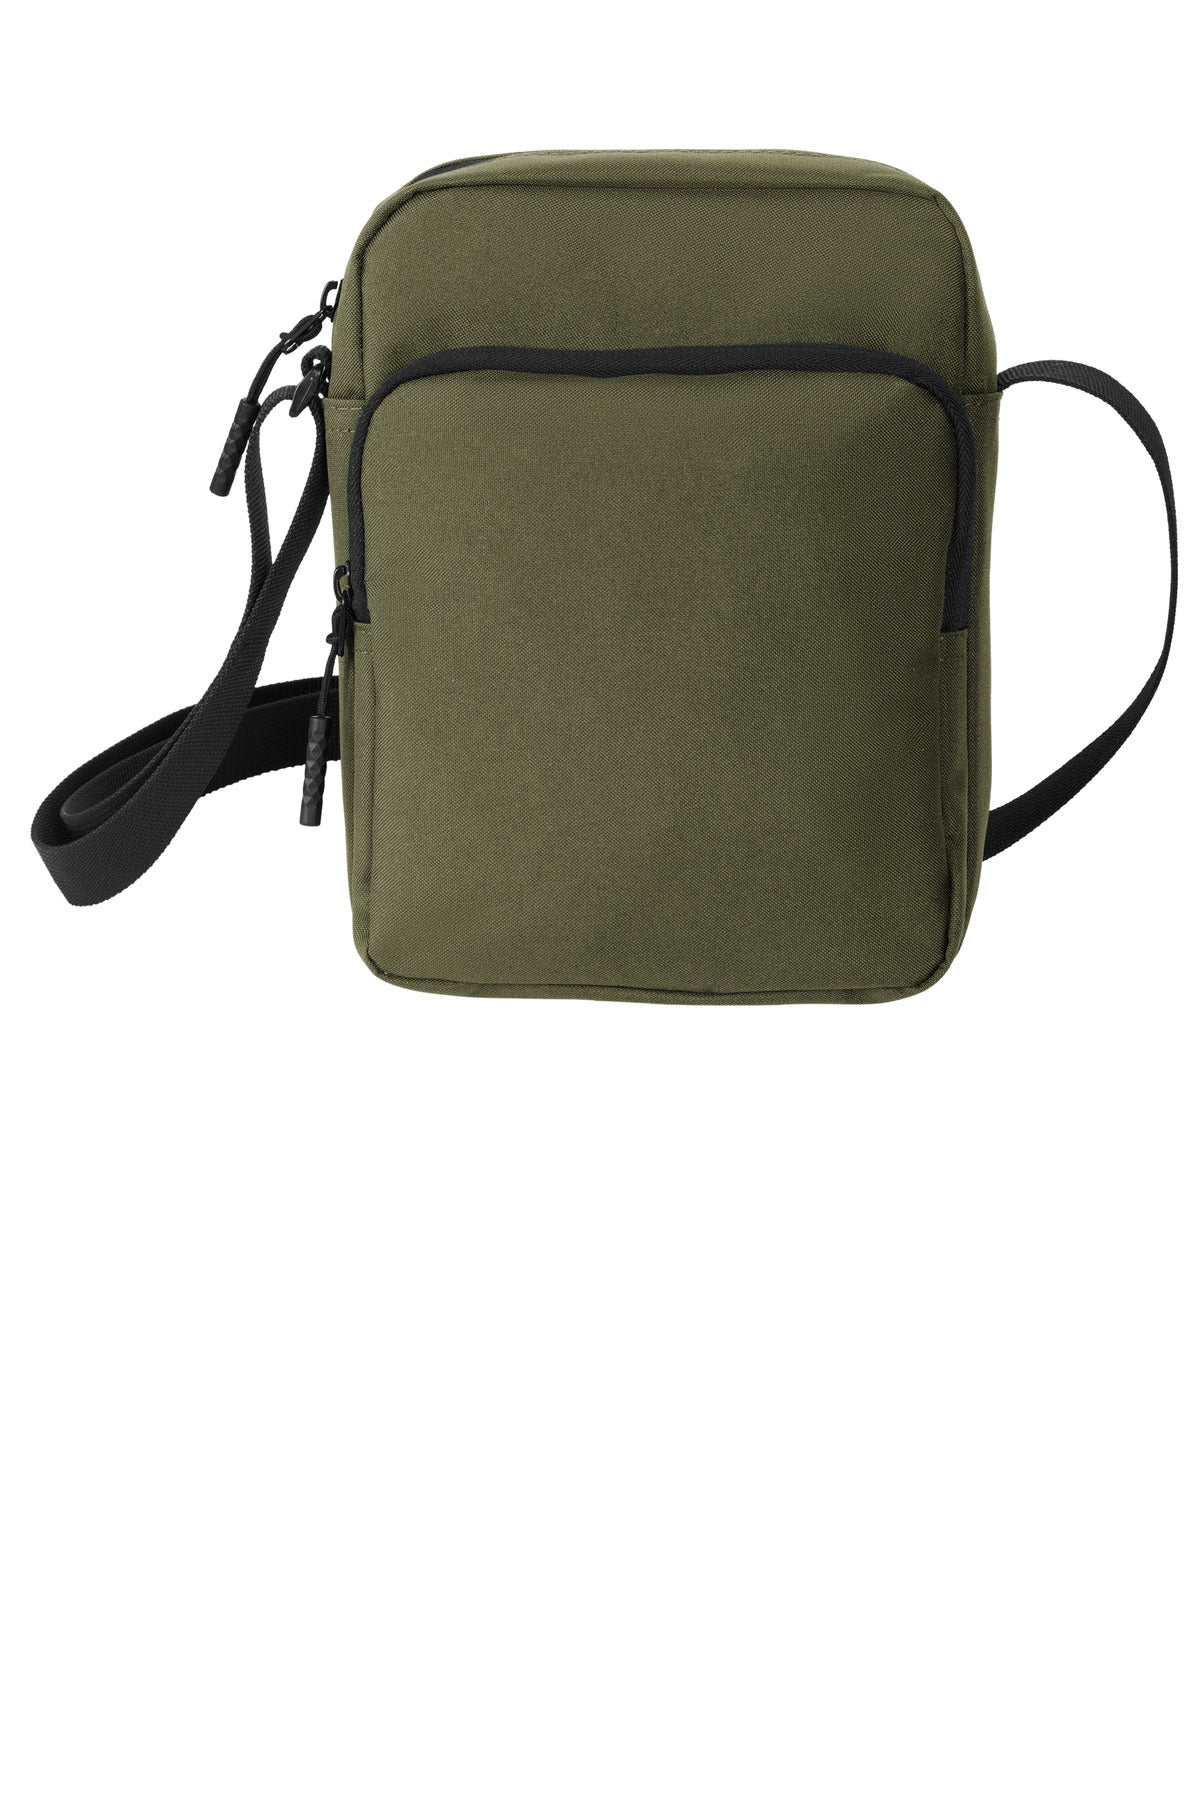 Bags Olive Green OSFA Port Authority